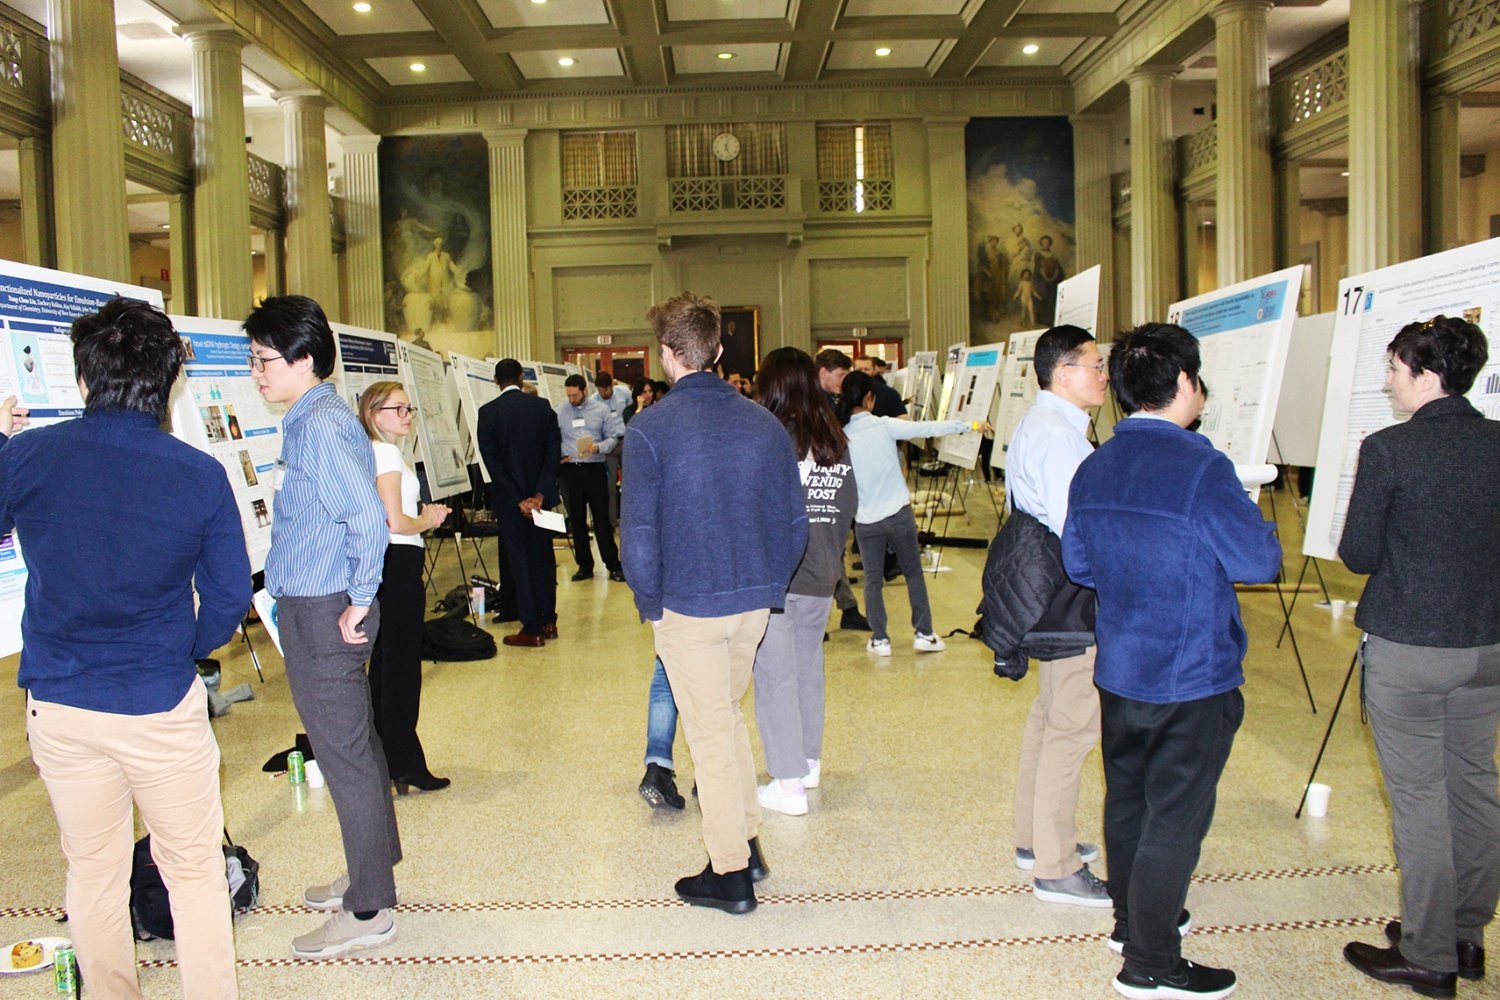 Polymer Day 2023 took place in Walker Memorial's Morss Hall. At the poster session, 64 teams presented, a record number for the event.